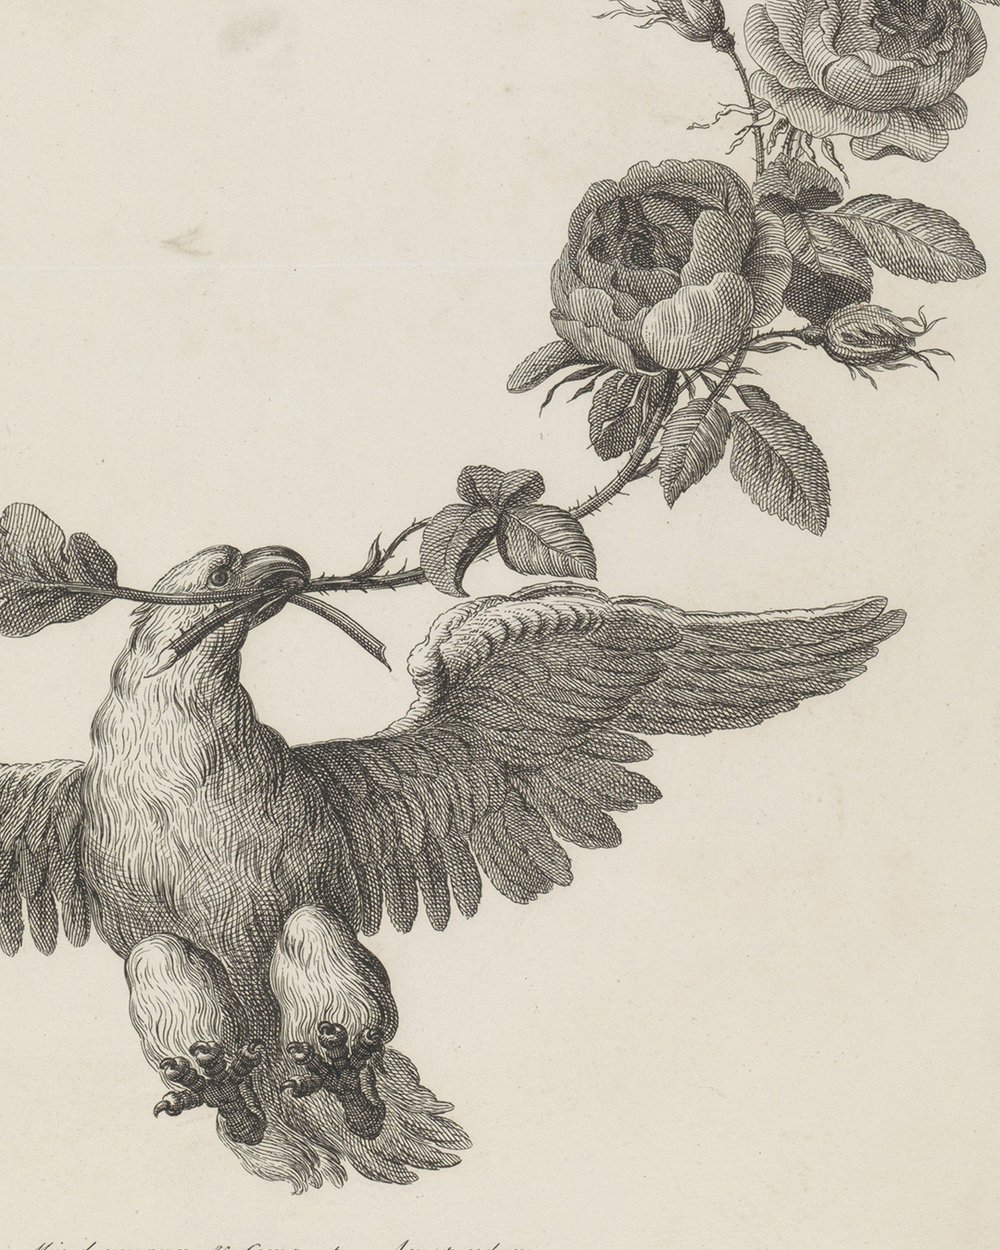 ''Wish letter with wreath and eagle'' (1814 - 1848)